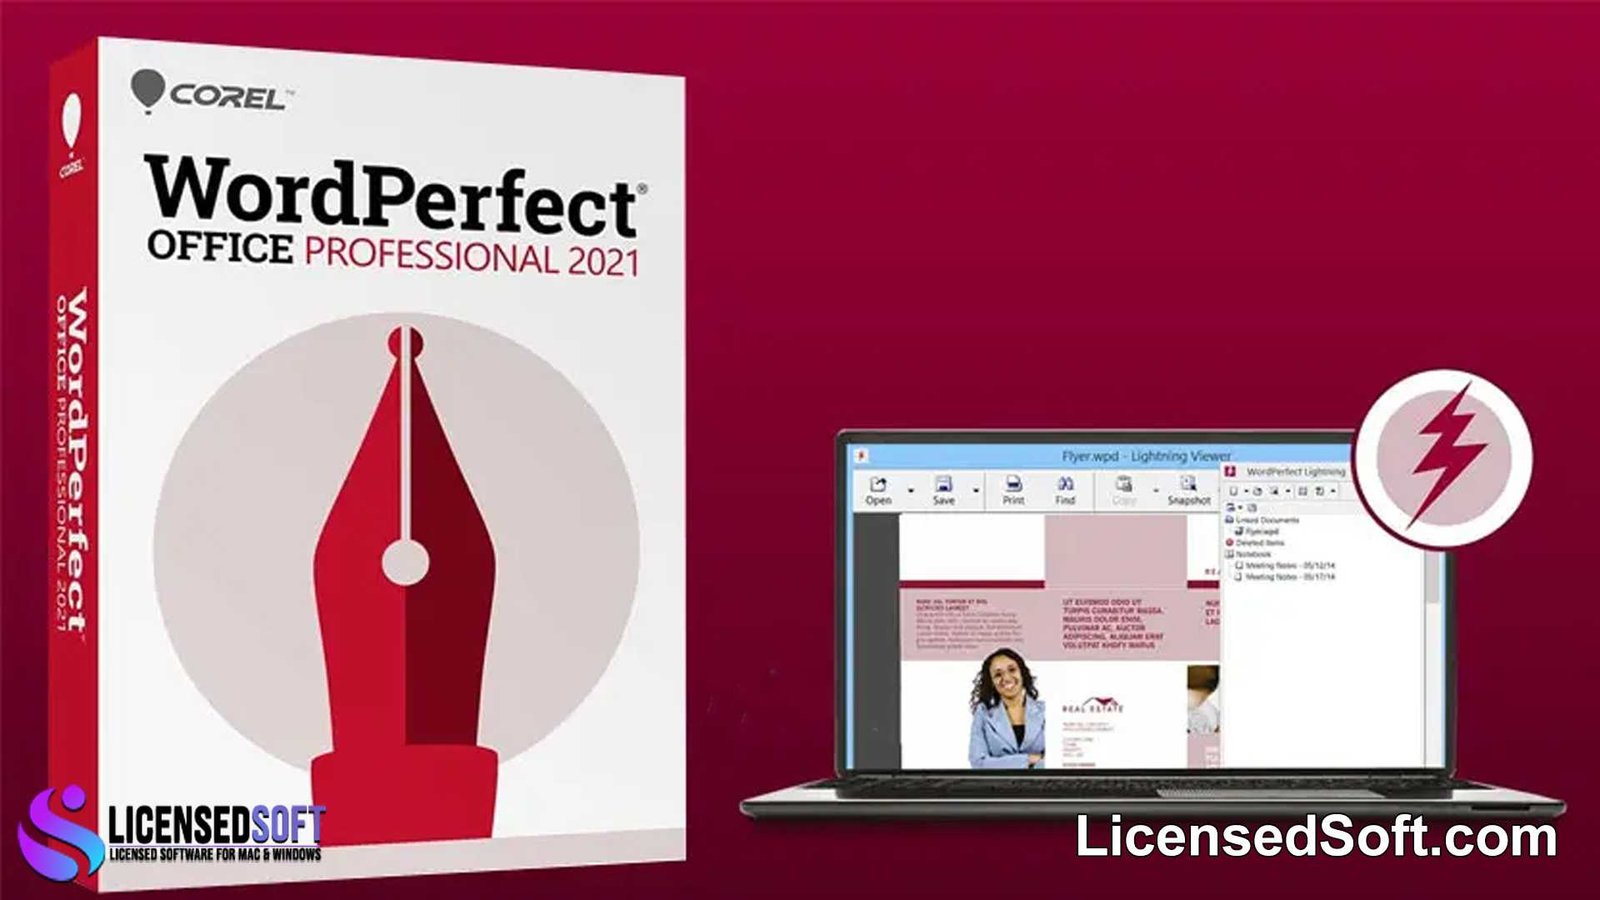 Corel WordPerfect Office Professional 2021 By LicensedSoft